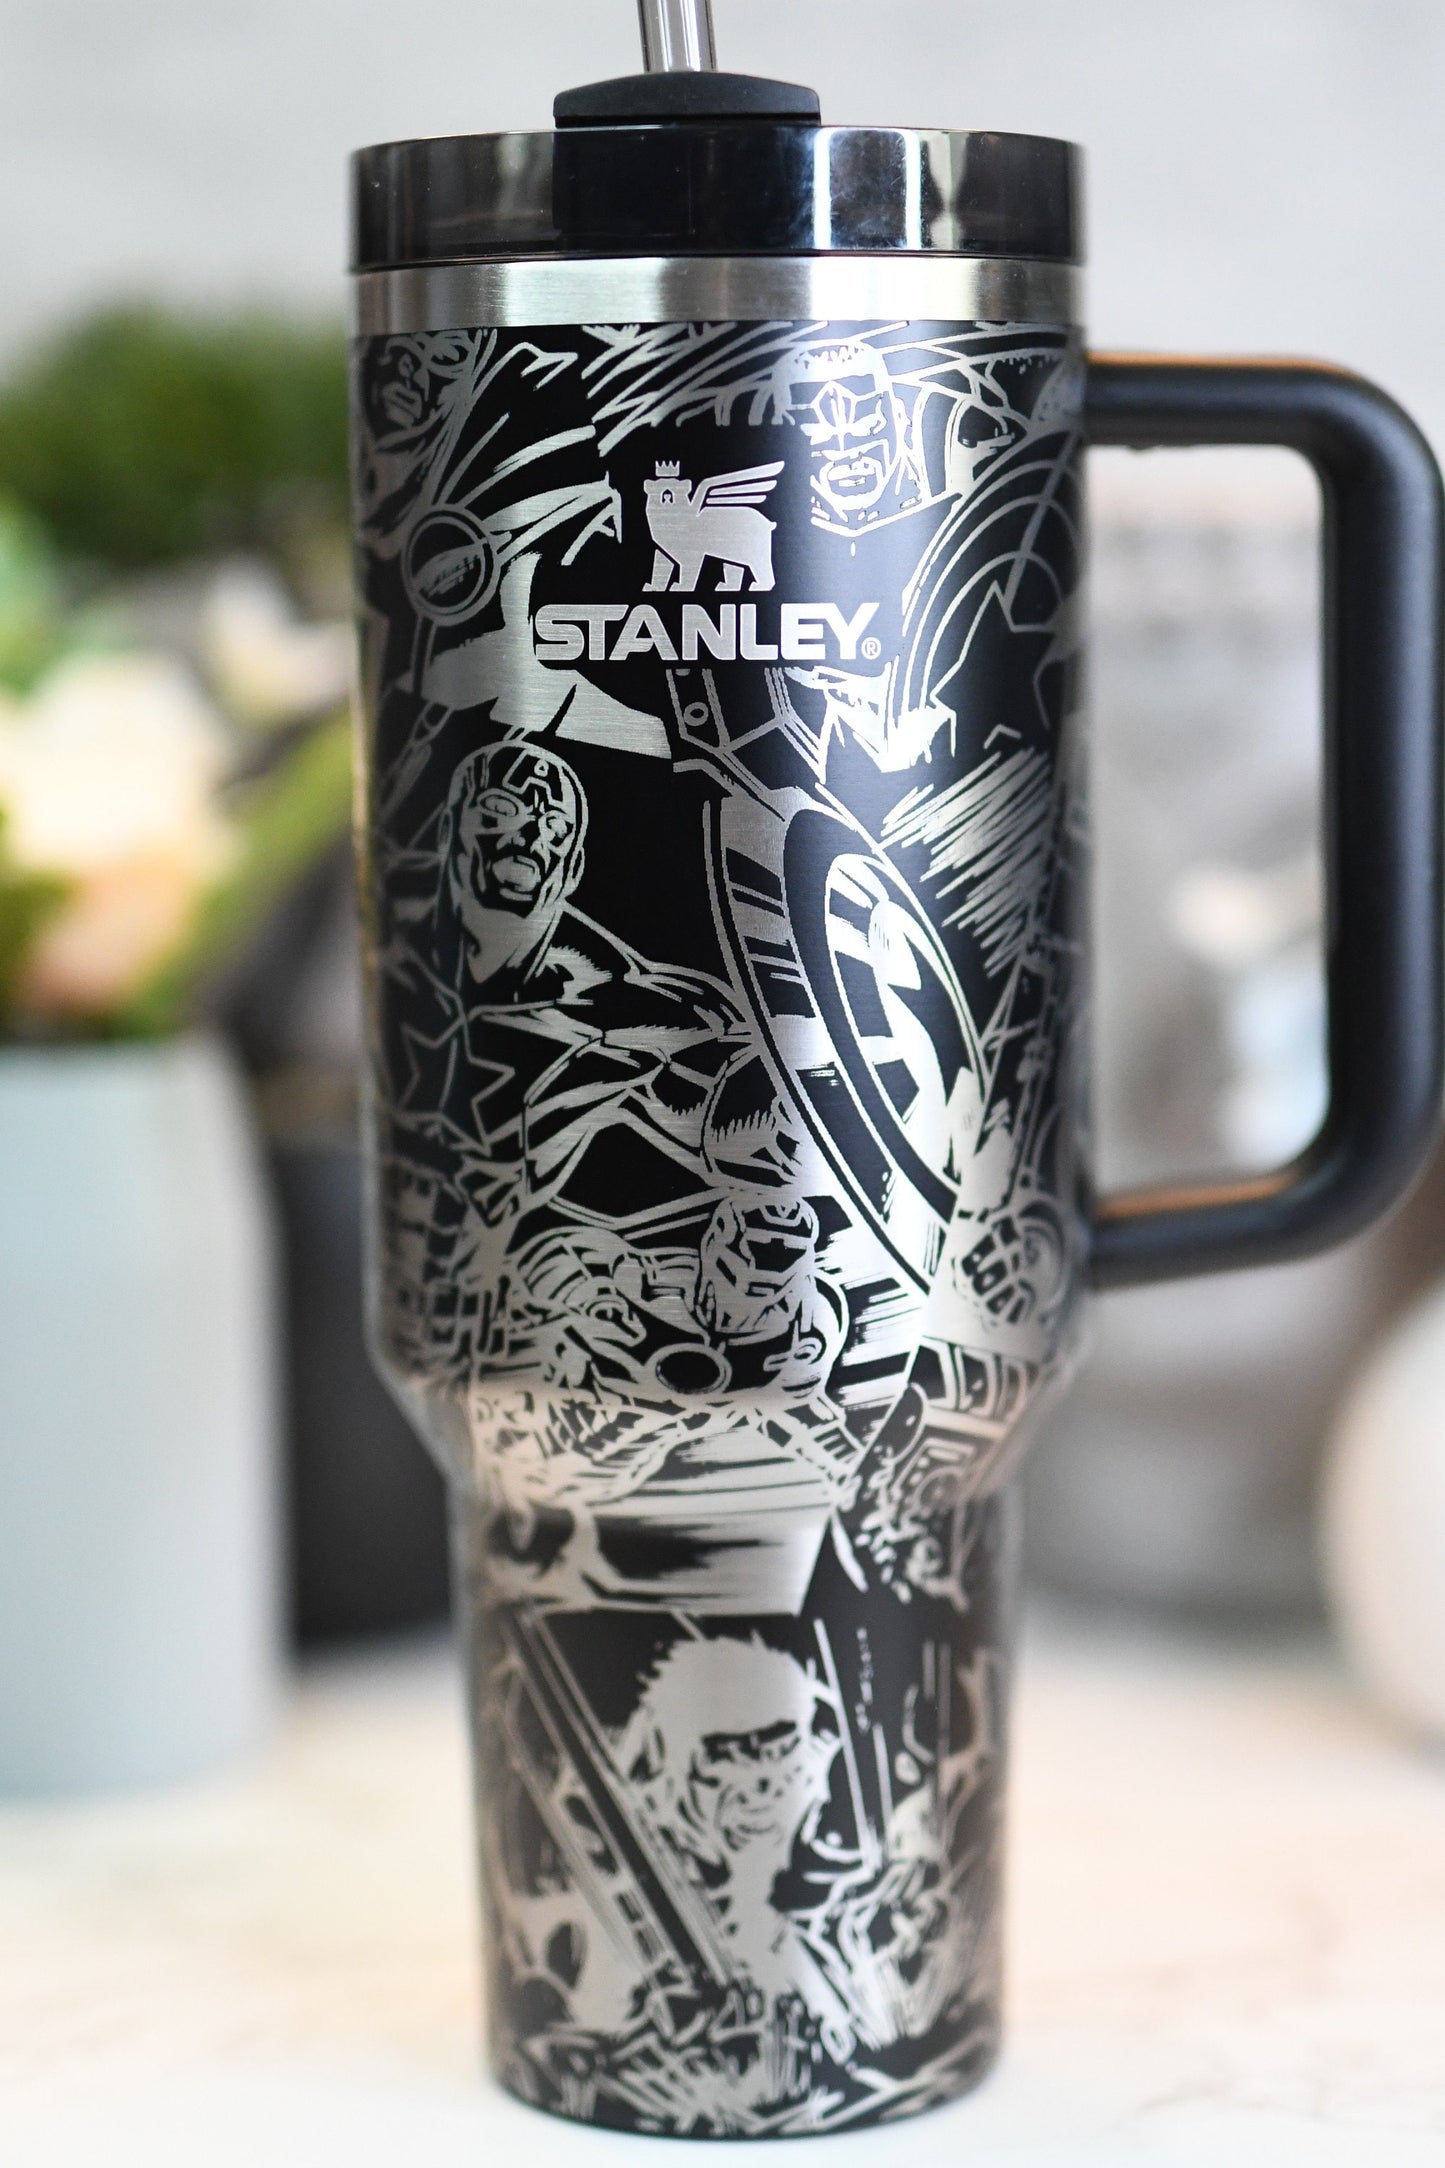 Stan Lee Stanley 30/40 oz Quencher Avengers